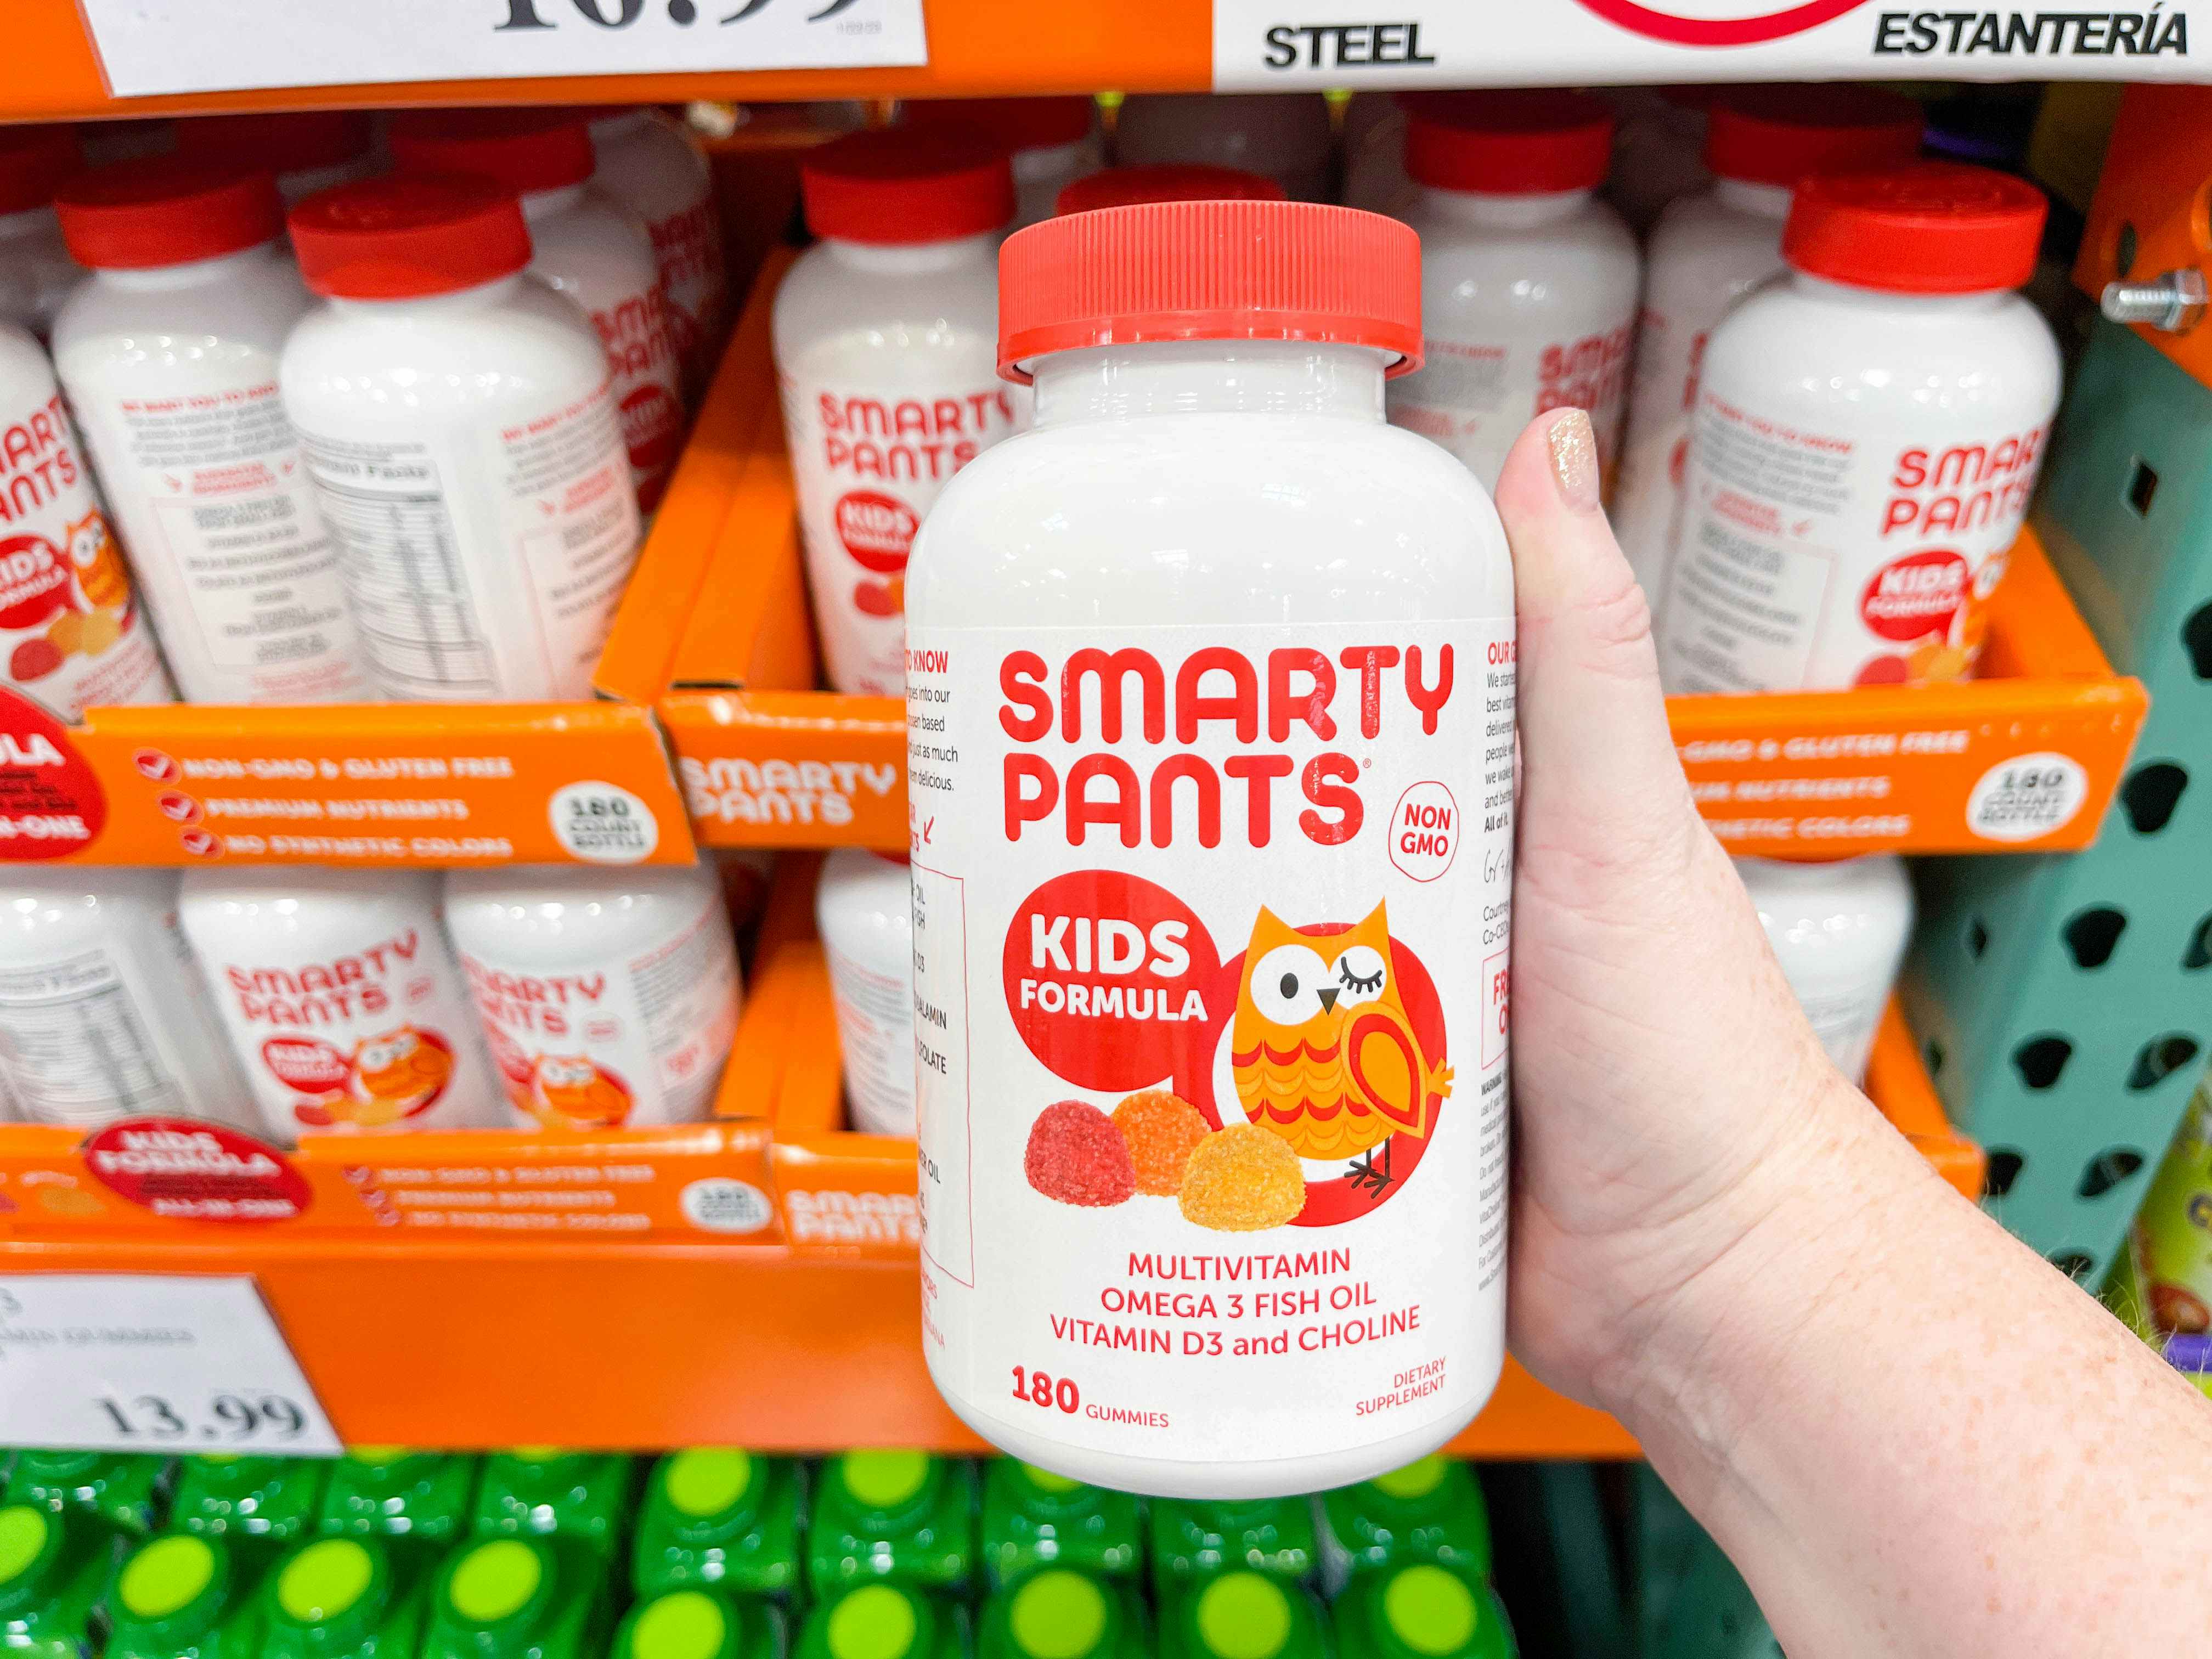 a bottle of smarty pants vitamins being held in store